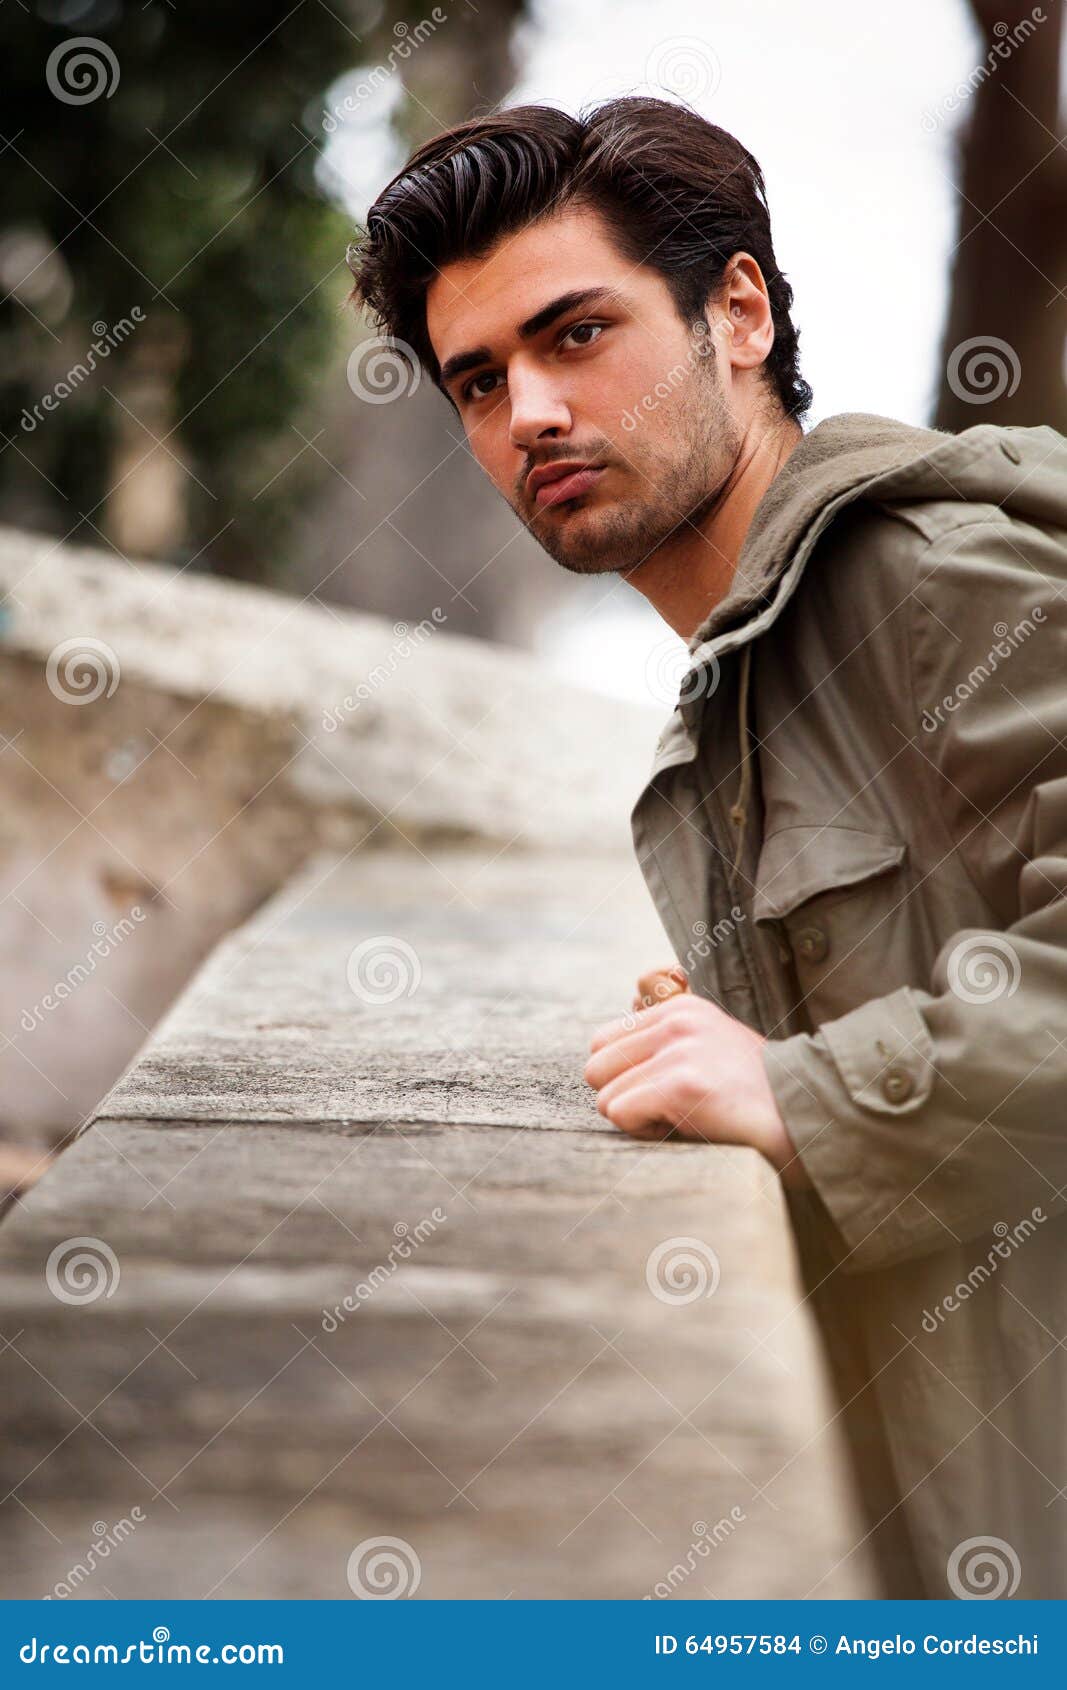 Beautiful Young Man Looking Leaning Against a Wall Stock Photo - Image ...